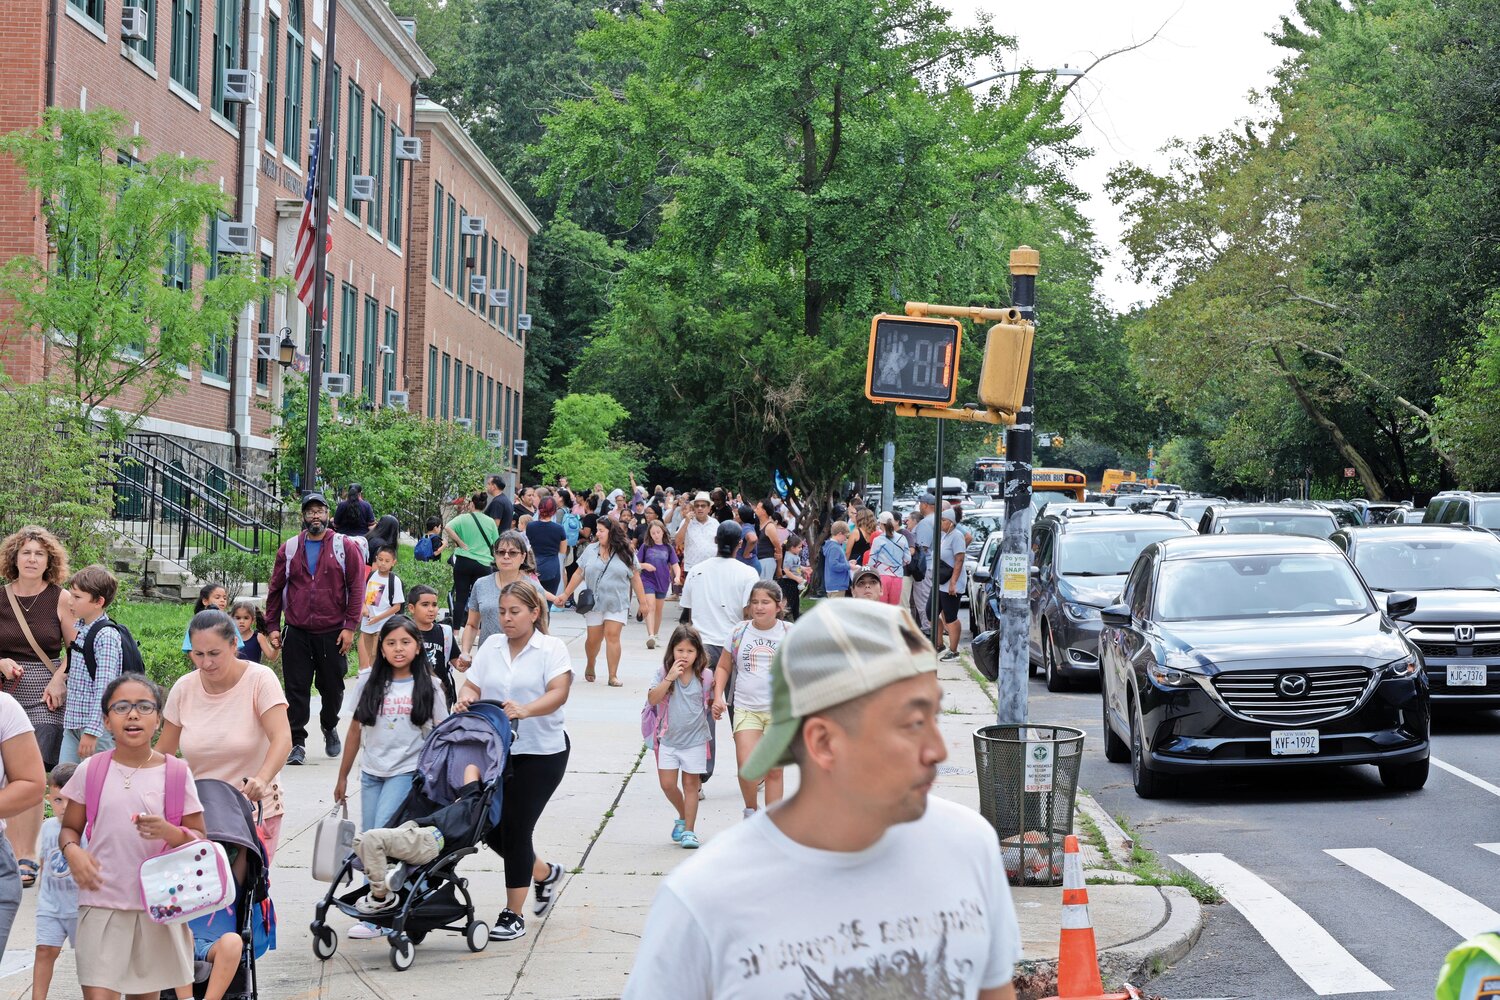 Amid a heat wave, hundreds of parents wait patiently to pick up their children at P.S. 81 Robert J. Christen School’s first day last Thursday.